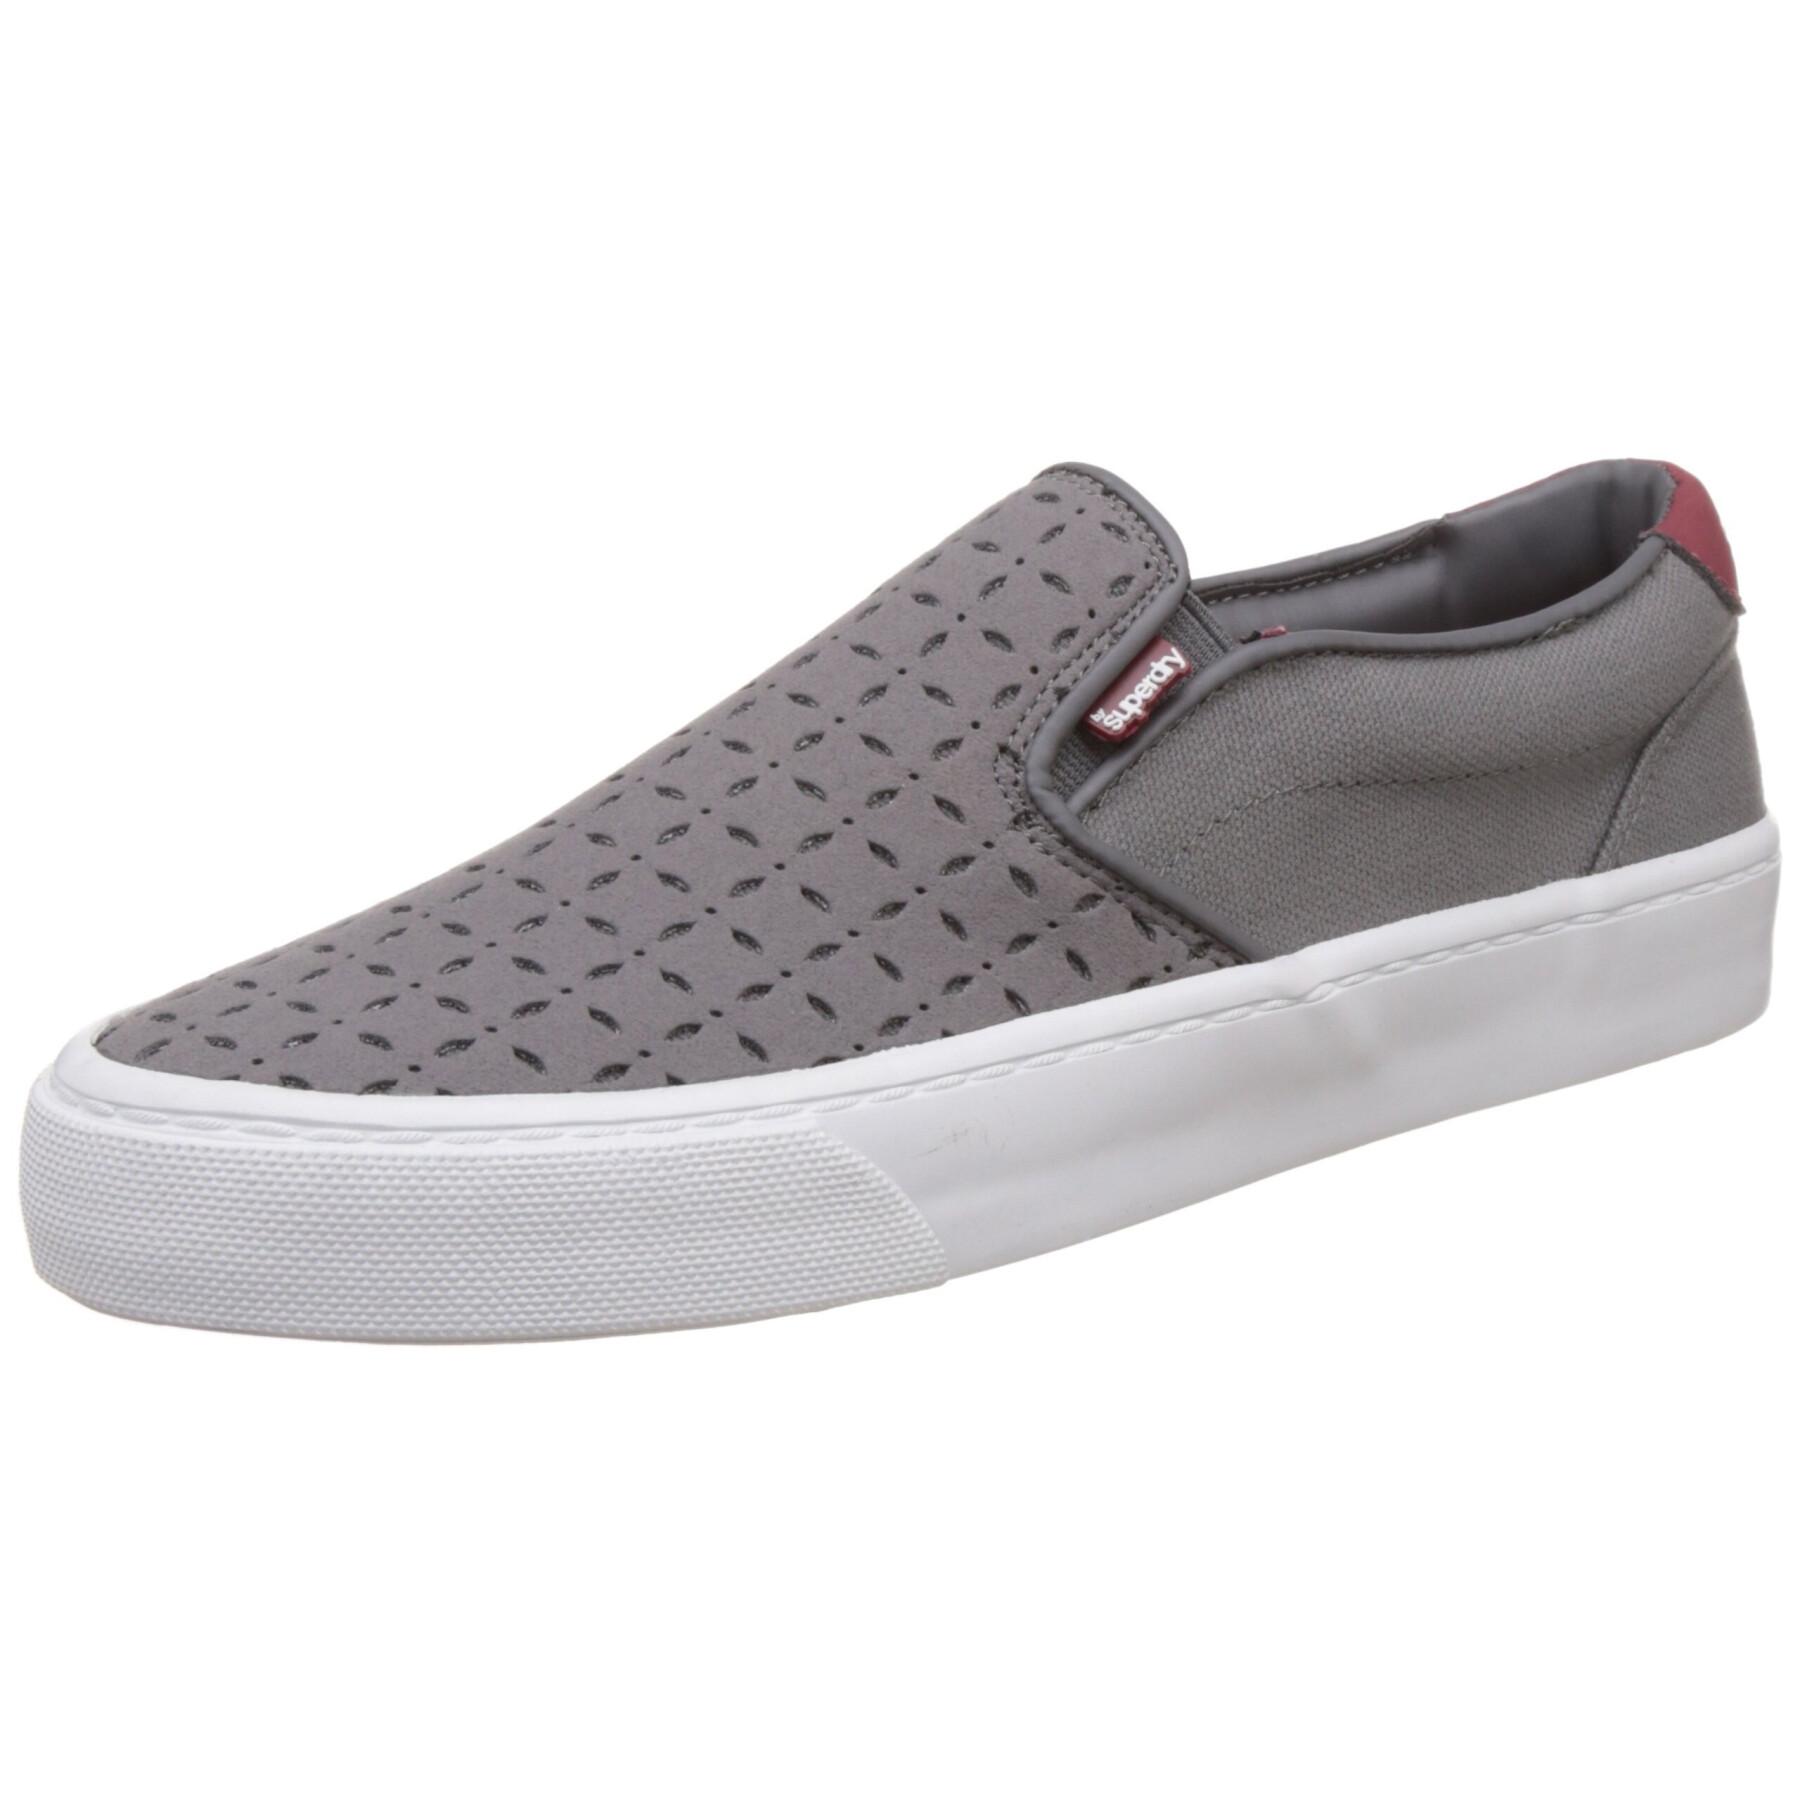 Zapatos de mujer Superdry Dion Slip On